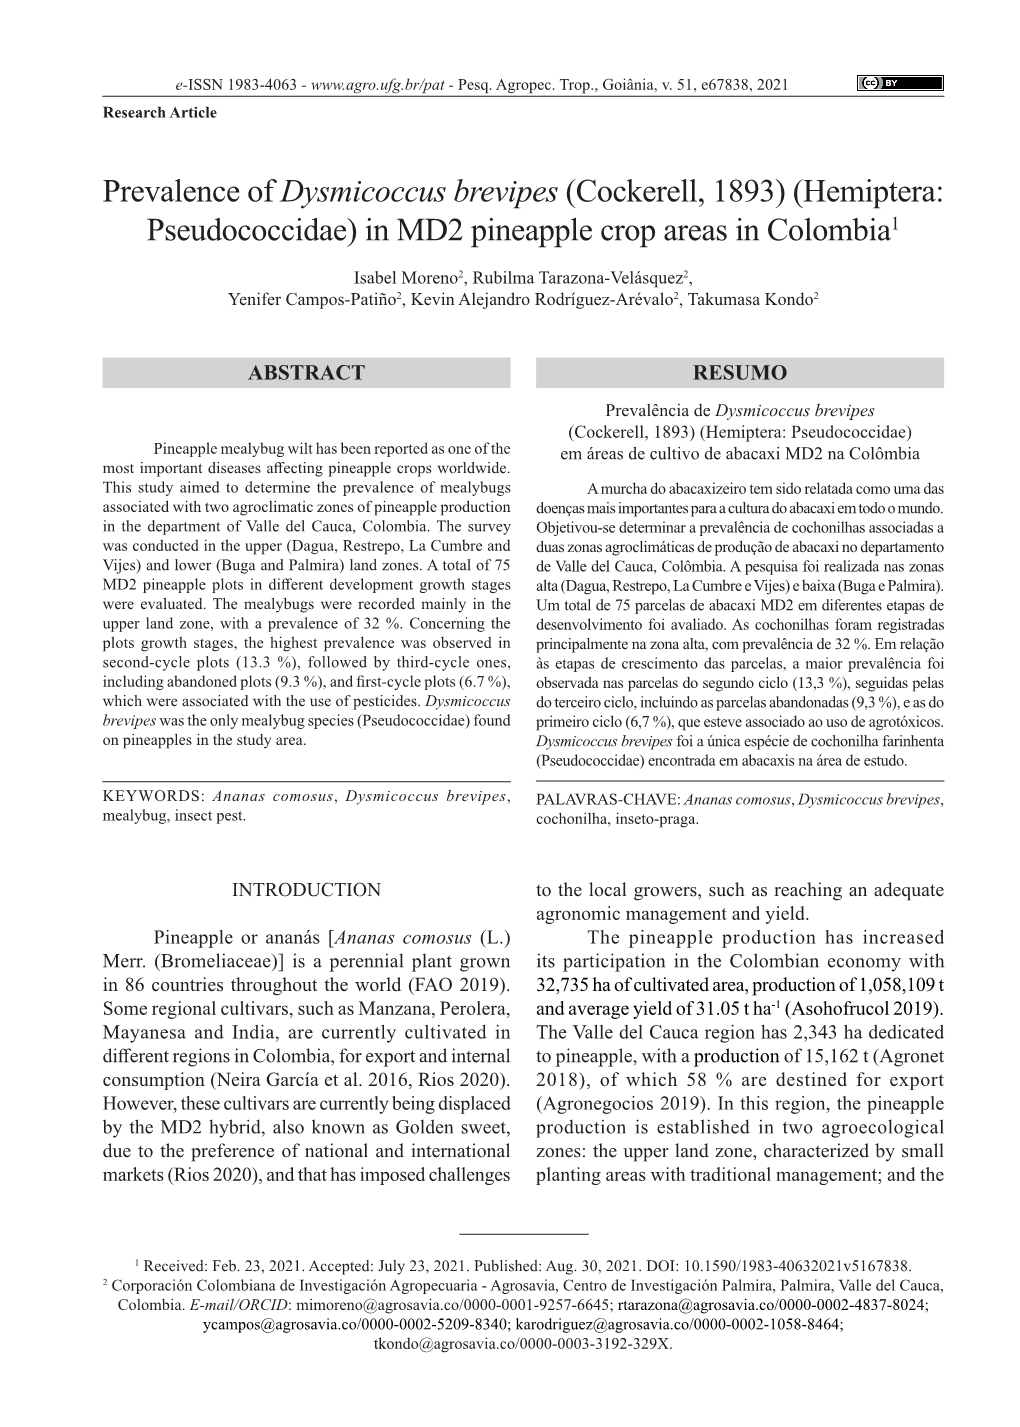 (Hemiptera: Pseudococcidae) in MD2 Pineapple Crop Areas in Colombia1